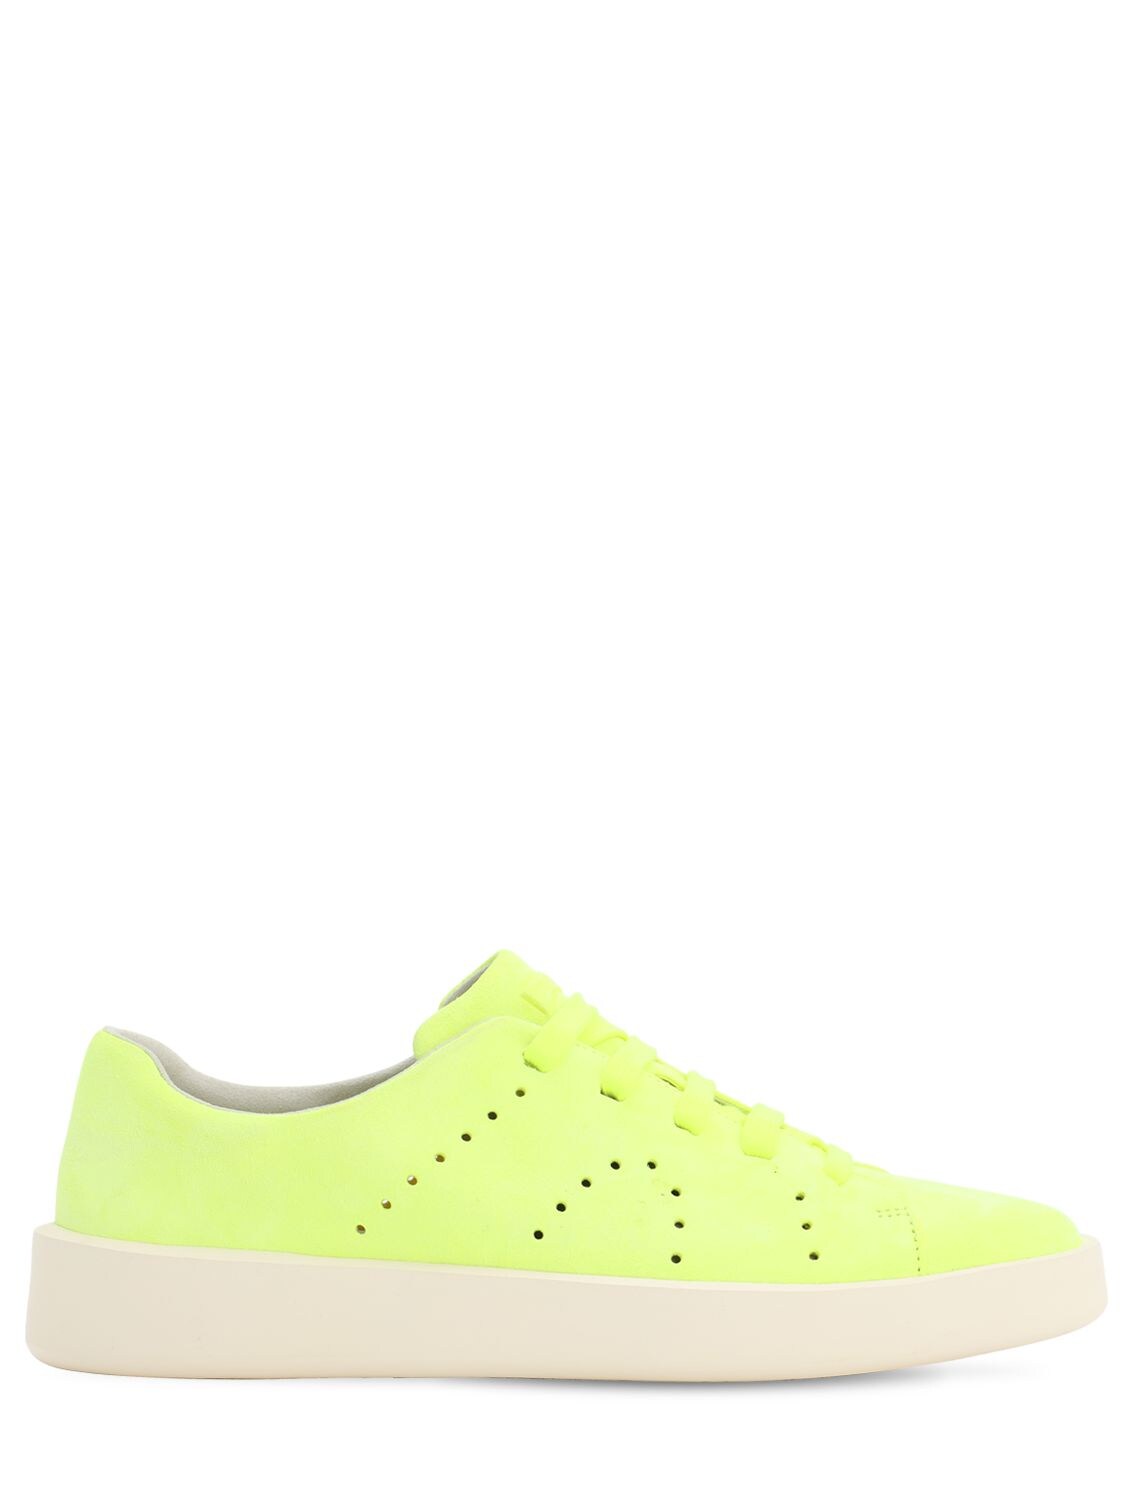 CAMPER LIME LEATHER SNEAKERS,71IX18007-MDE20